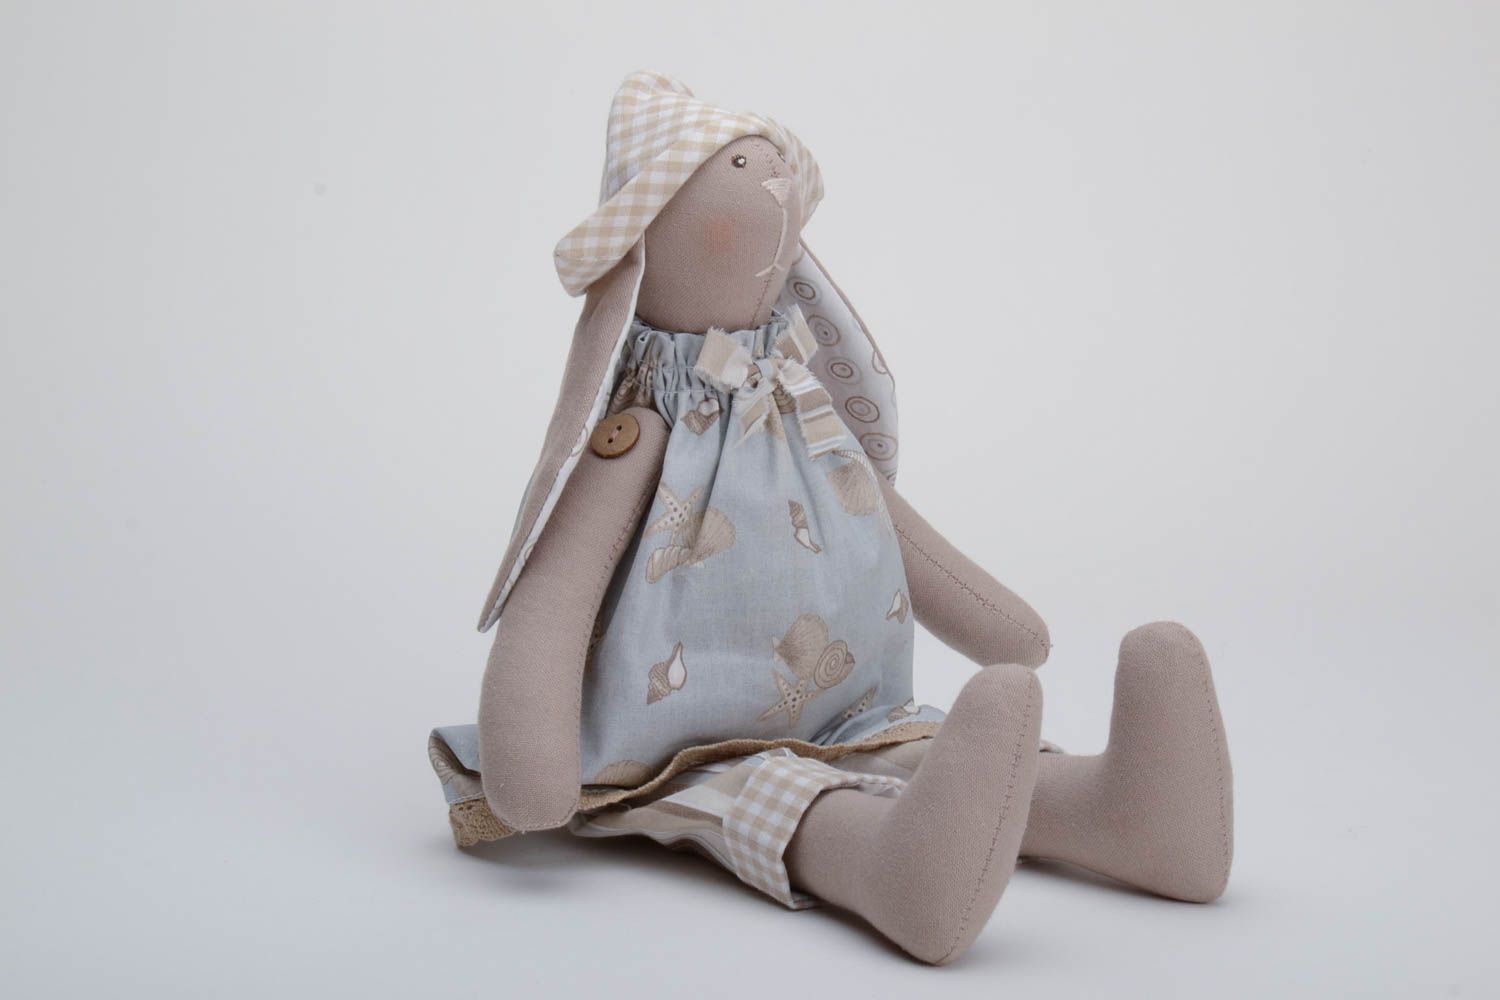 Handmade soft toy sewn of cotton fabric rabbit with long ears in hat and dress photo 2